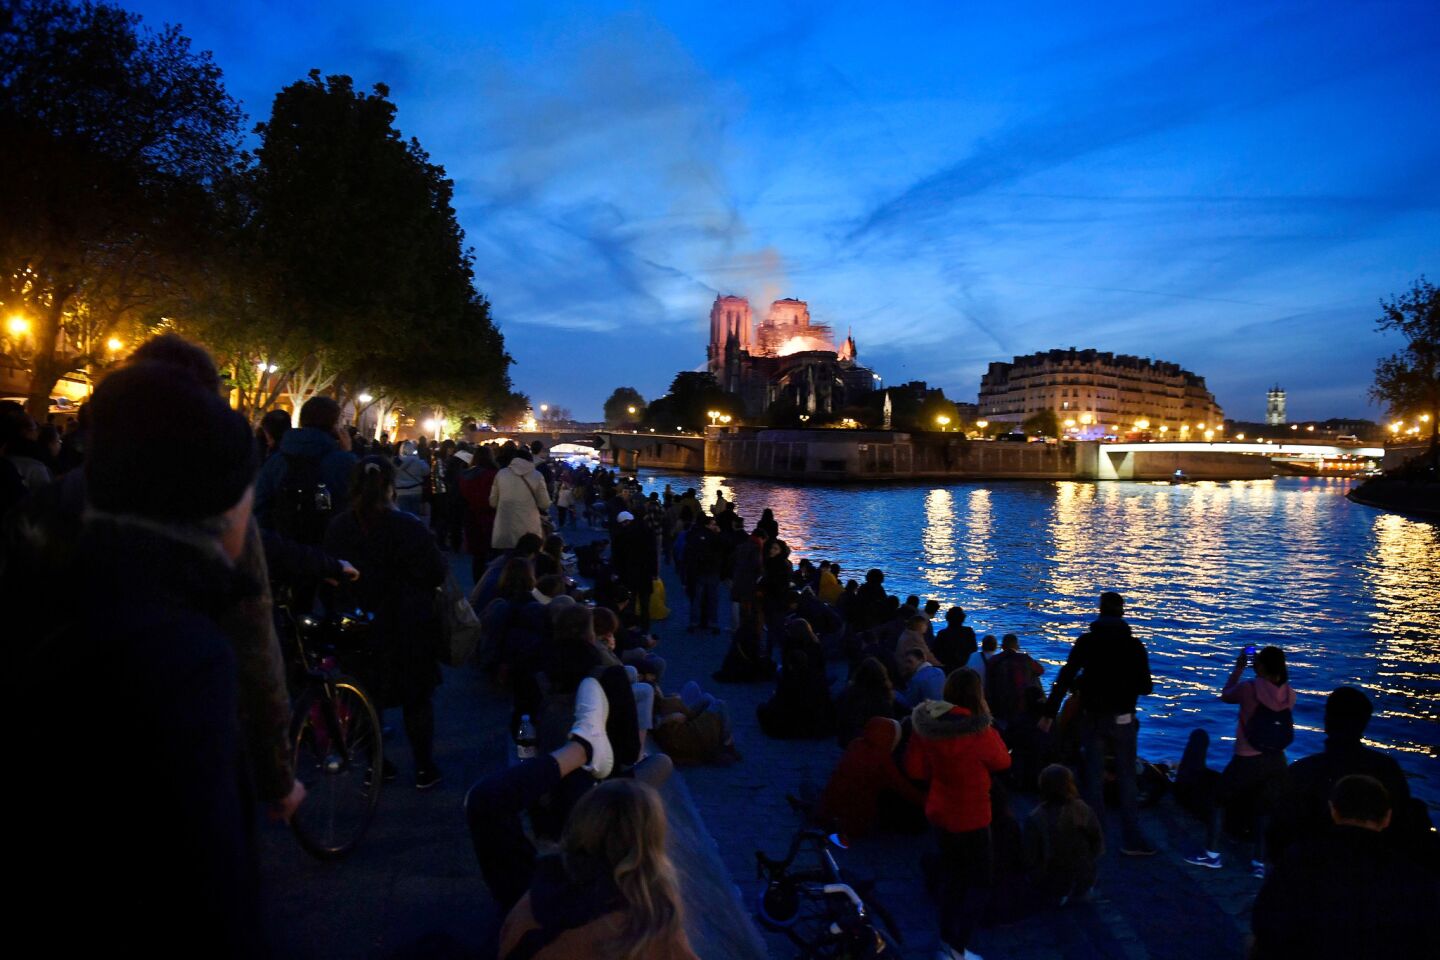 Parisians gather on the Seine riverbank to look at the flames burning the roof of Notre Dame. A ferocious and fast-moving blaze, which broke out about 6:45 p.m., destroyed large parts of the 850-year-old Gothic monument in Paris.